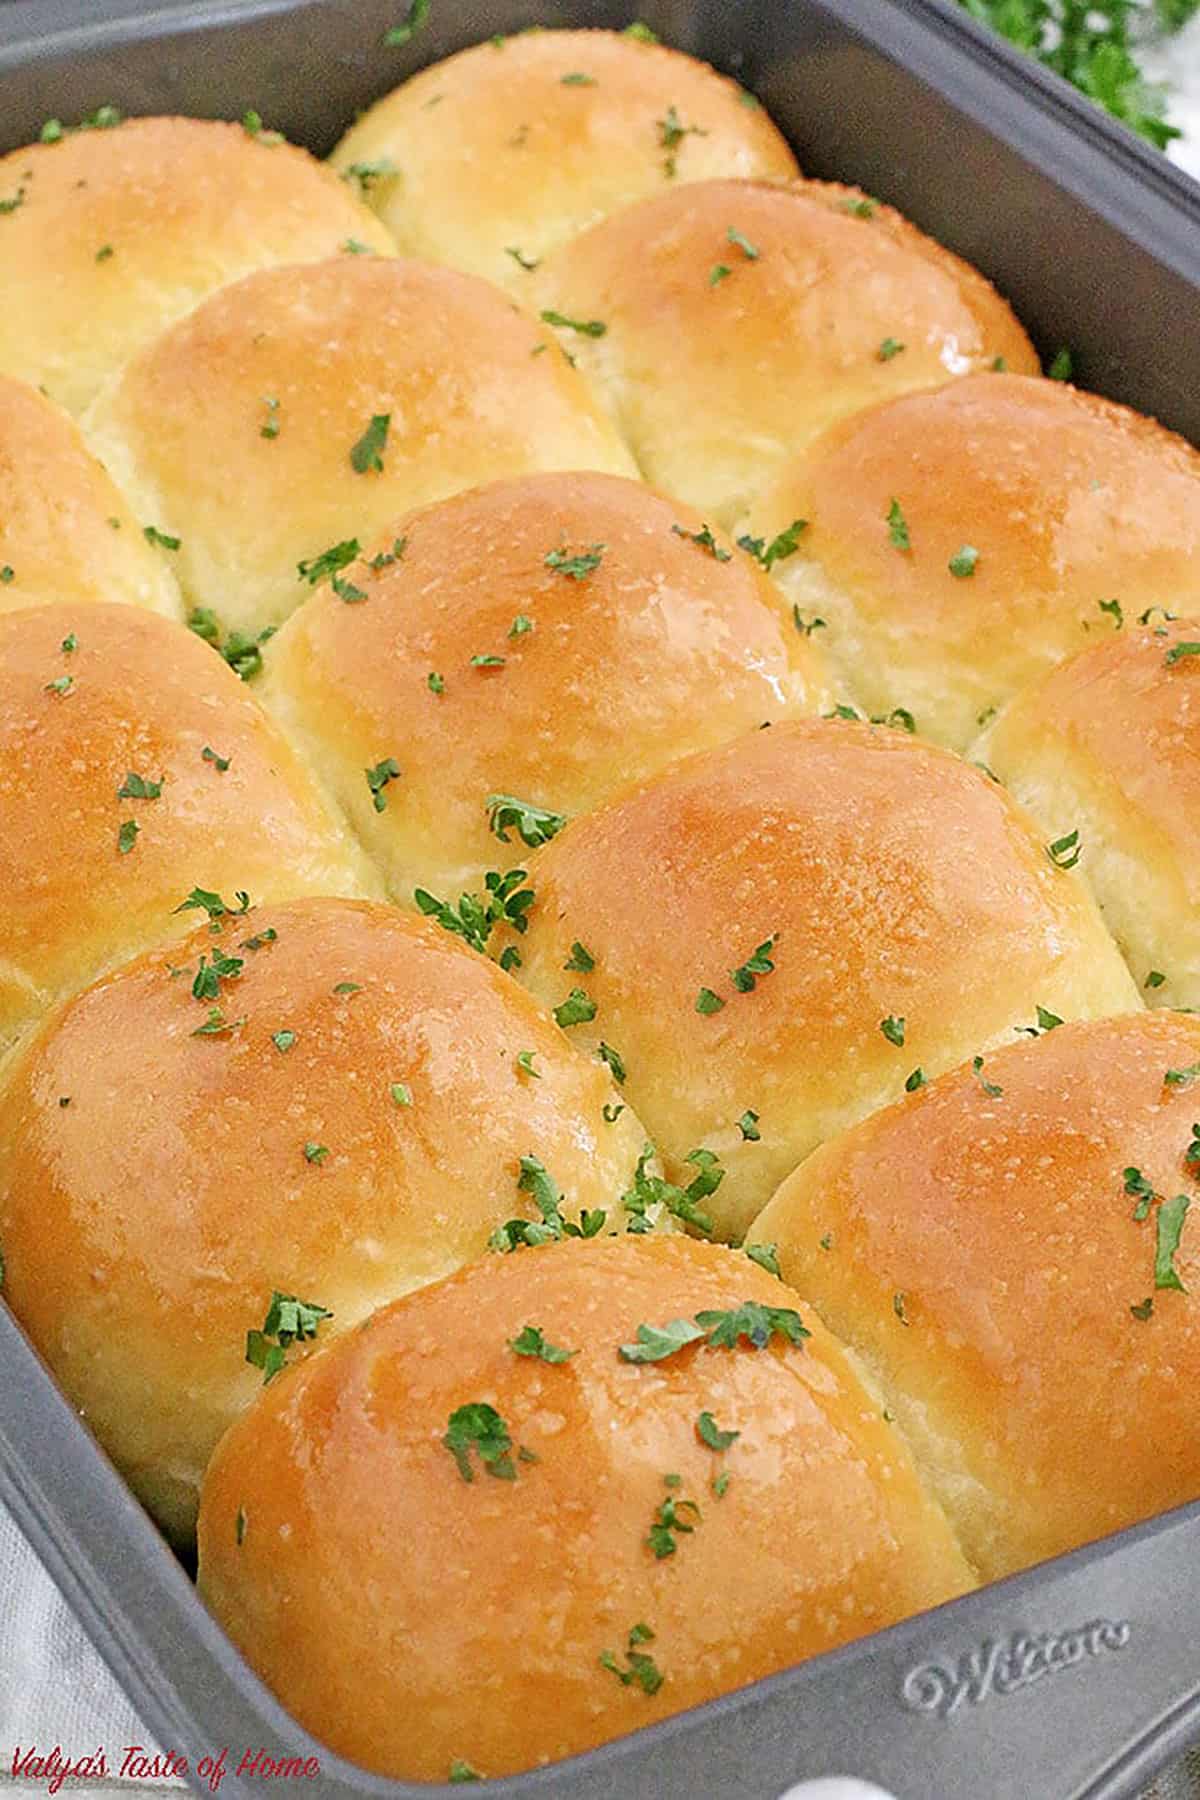 If you have any leftover mashed potatoes then you have to make these delicious Potato Rolls! They stay softer and fresher for longer, and the mashed potatoes add a deliciously subtle flavor to them!